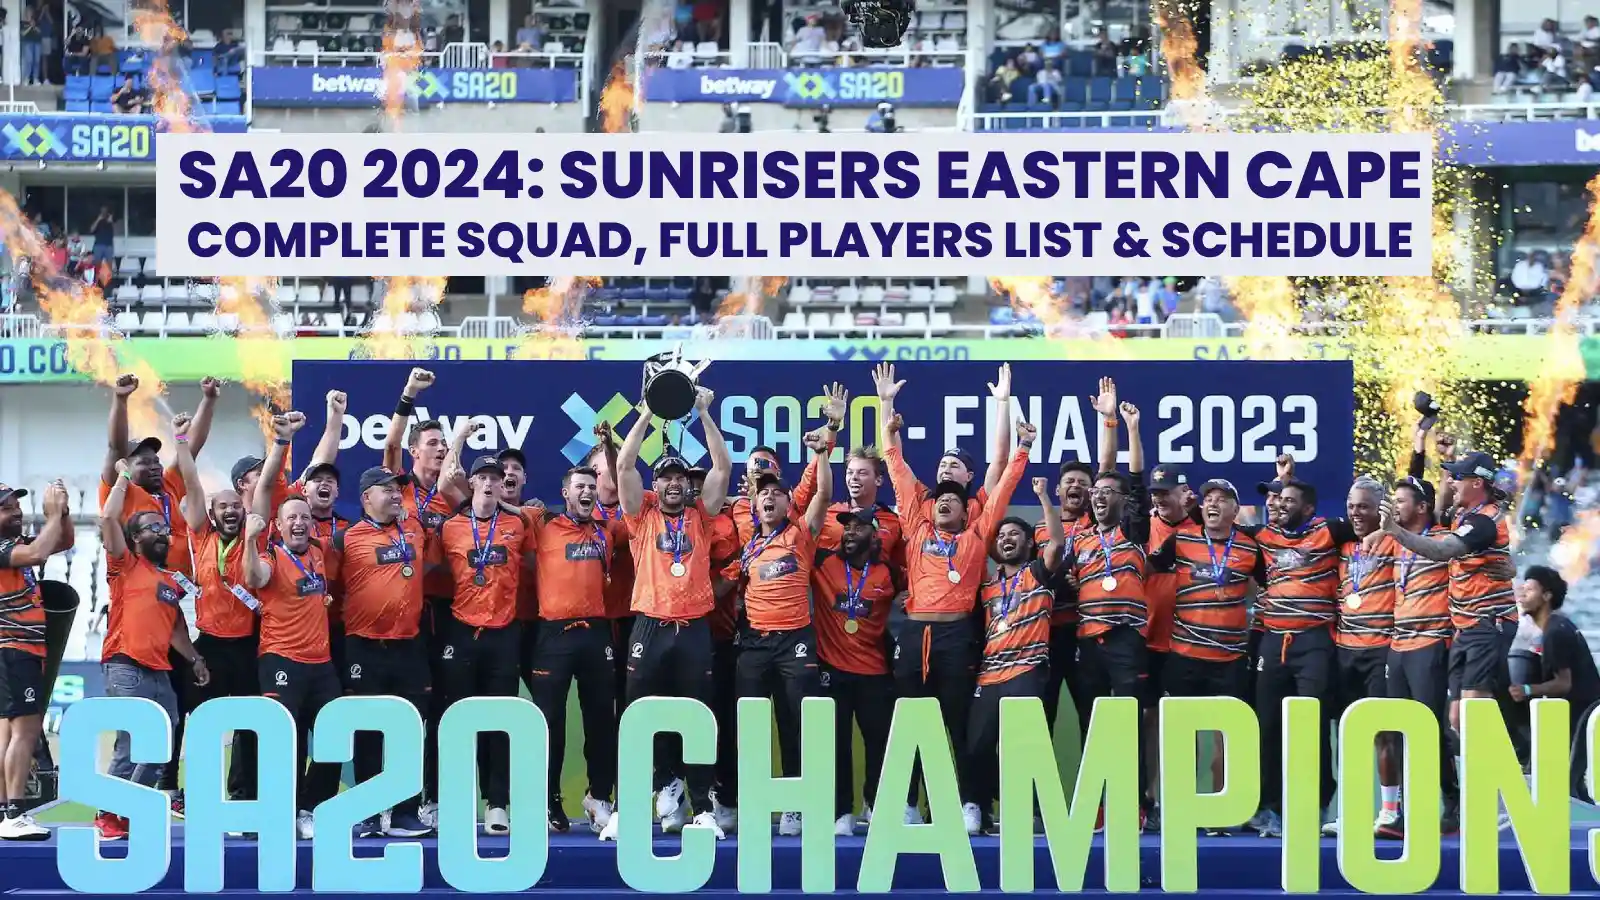 SA T20 2024 Final: Sunrisers Eastern Cape Defend Title With A Resounding Win